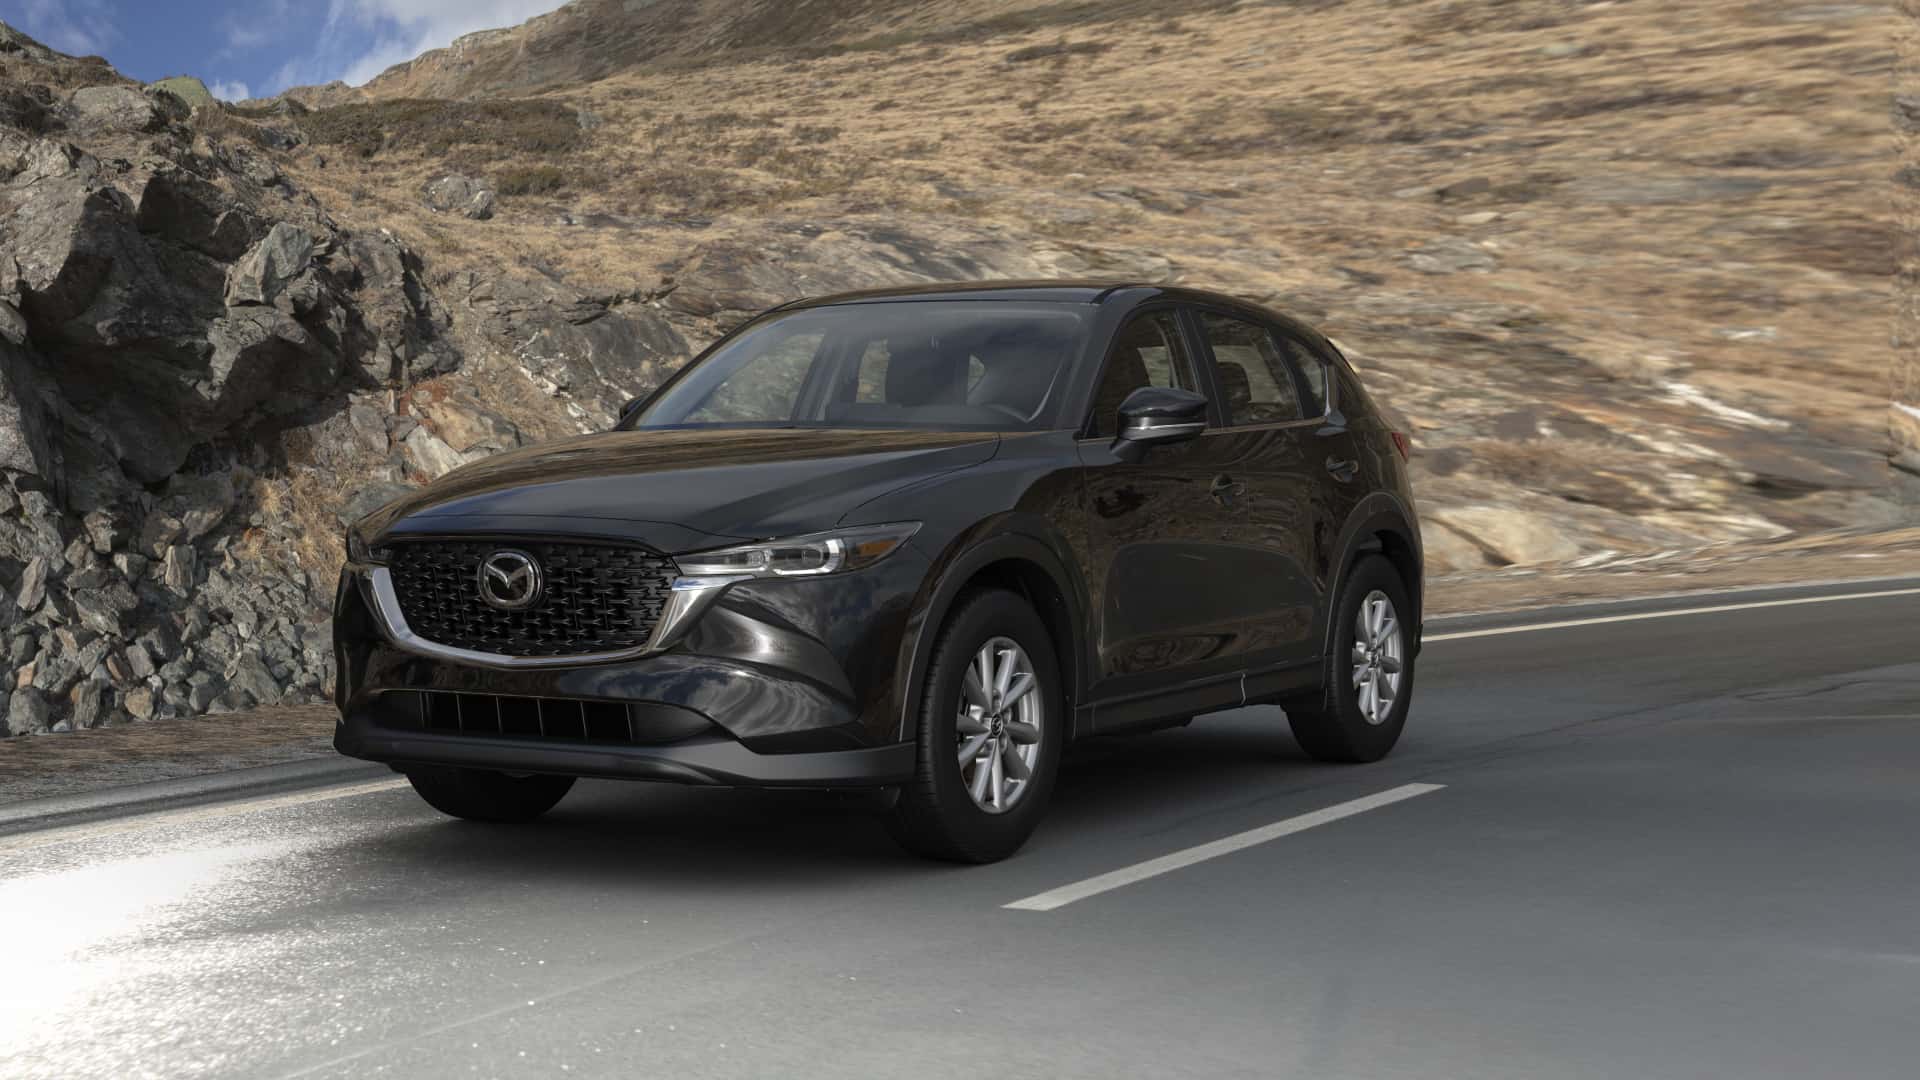 2023 Mazda CX-5 2.5 S Deep Crystal Blue Mica | Russell & Smith Mazda in Houston TX